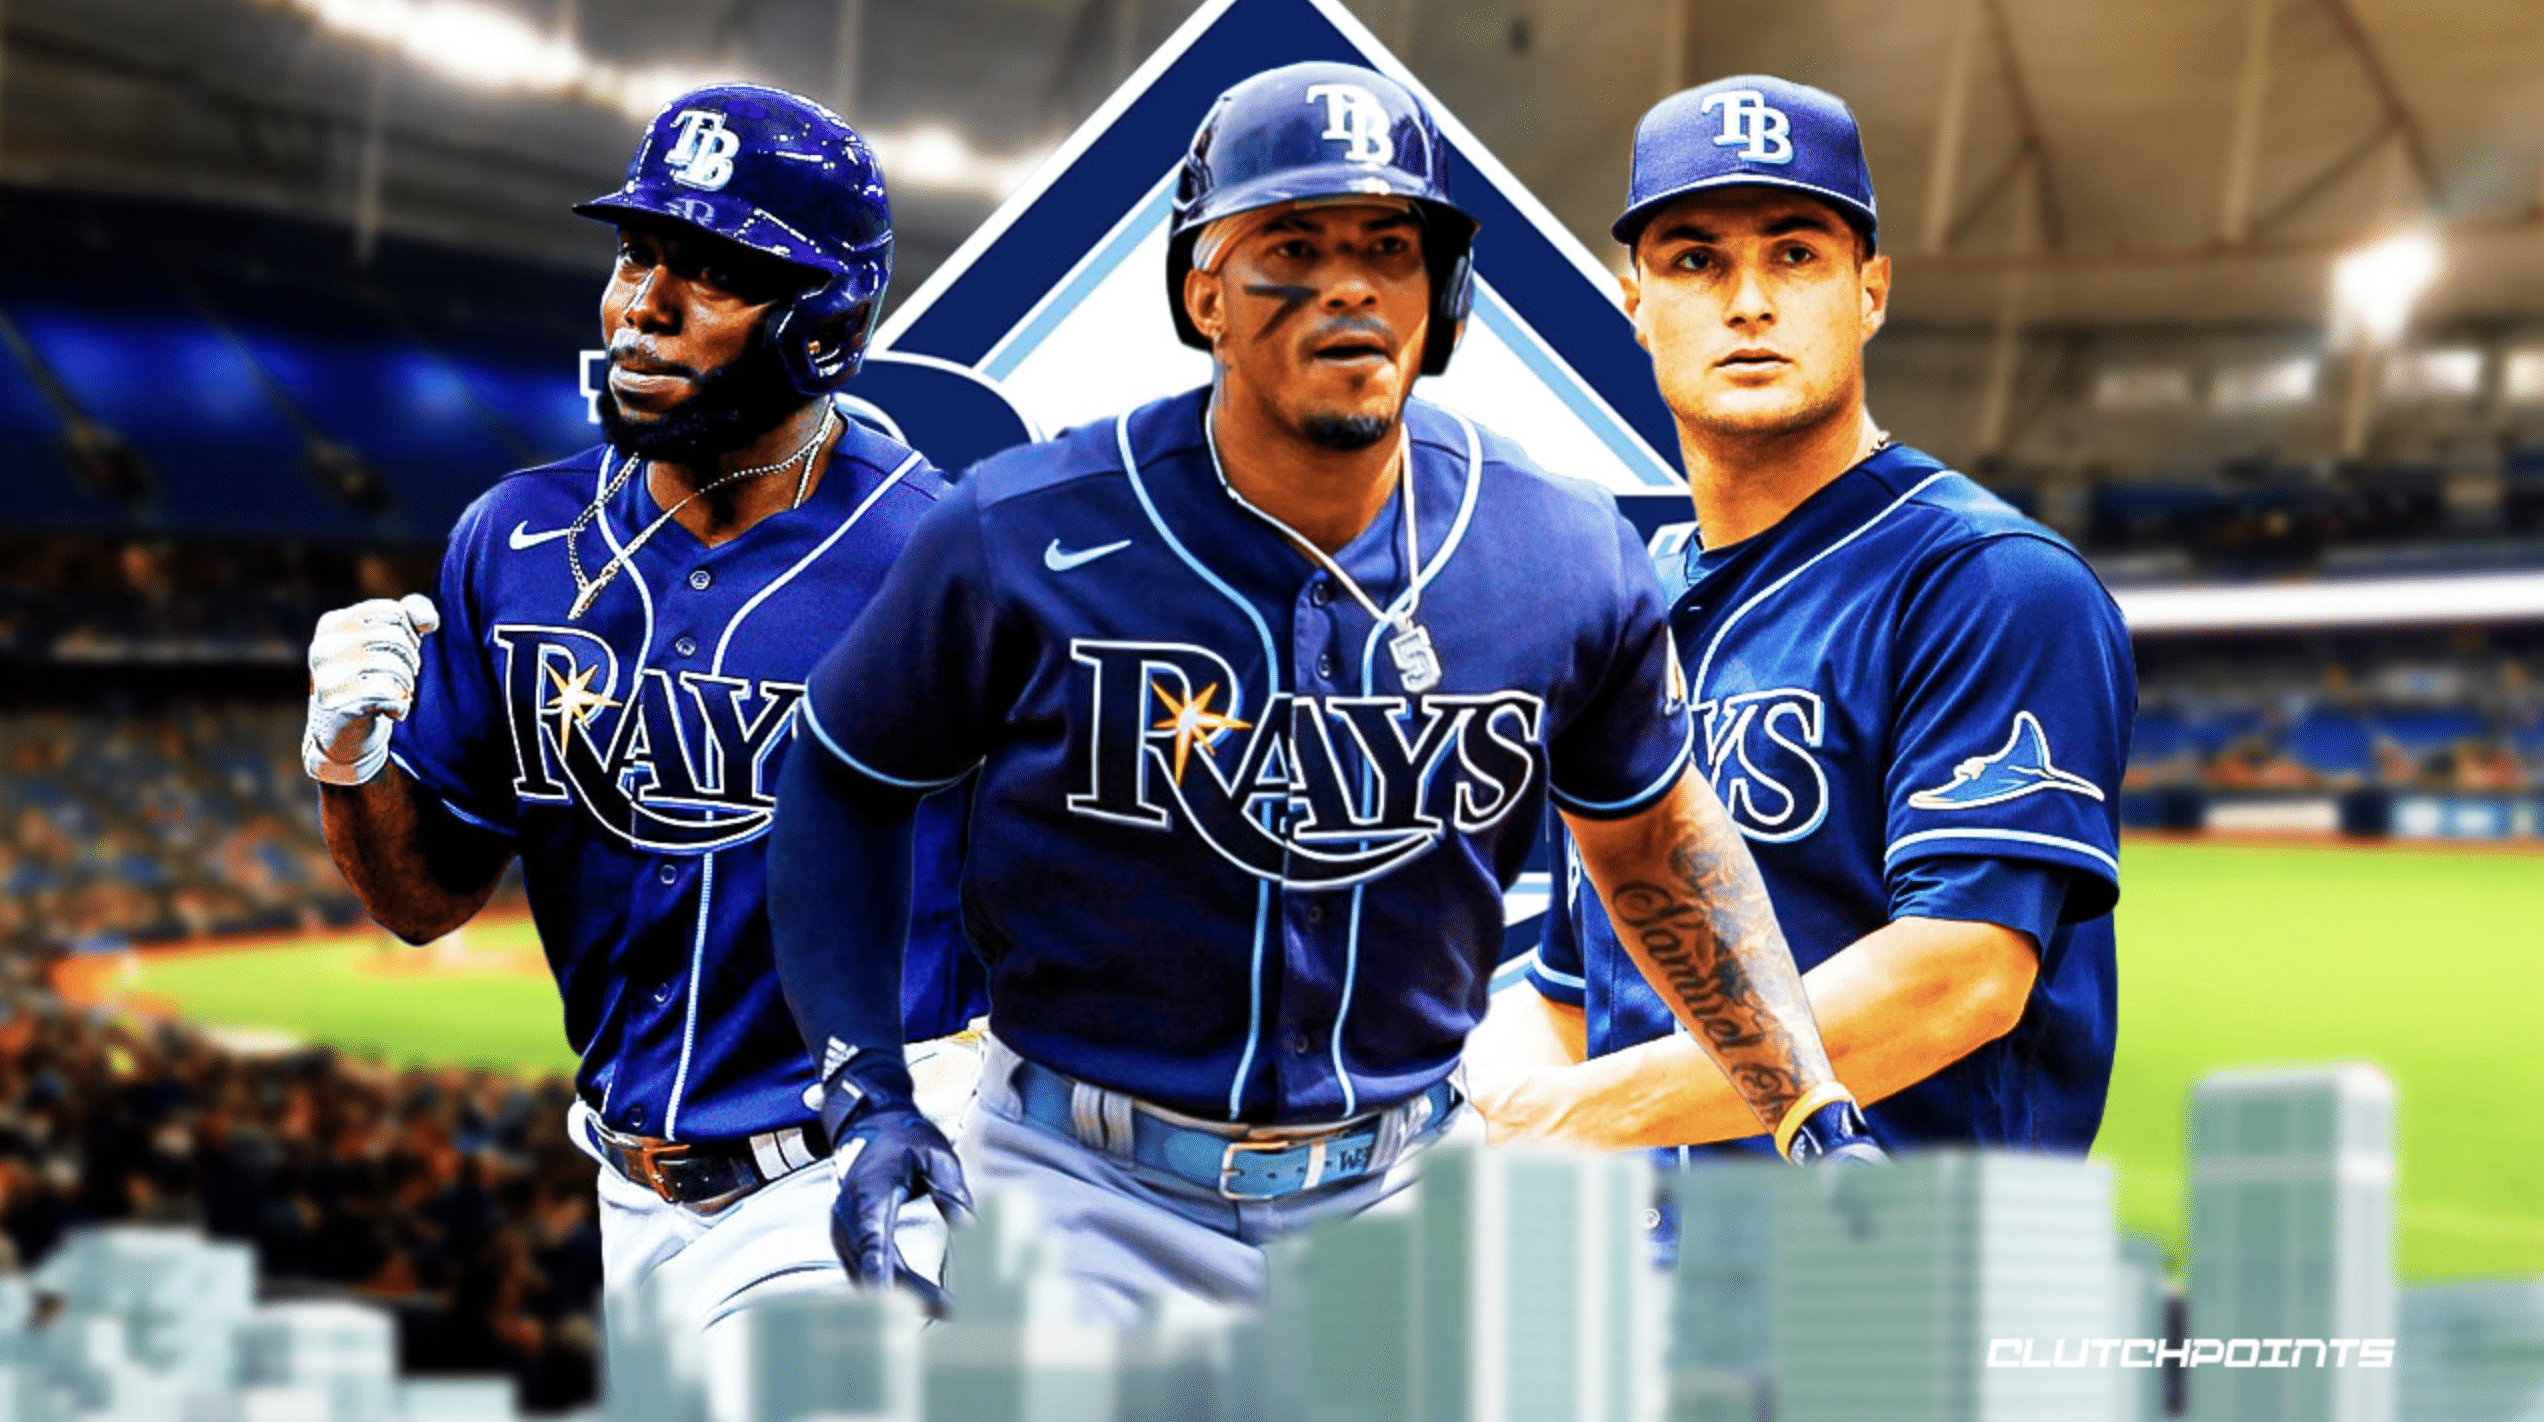 Rays make history with undefeated start to season